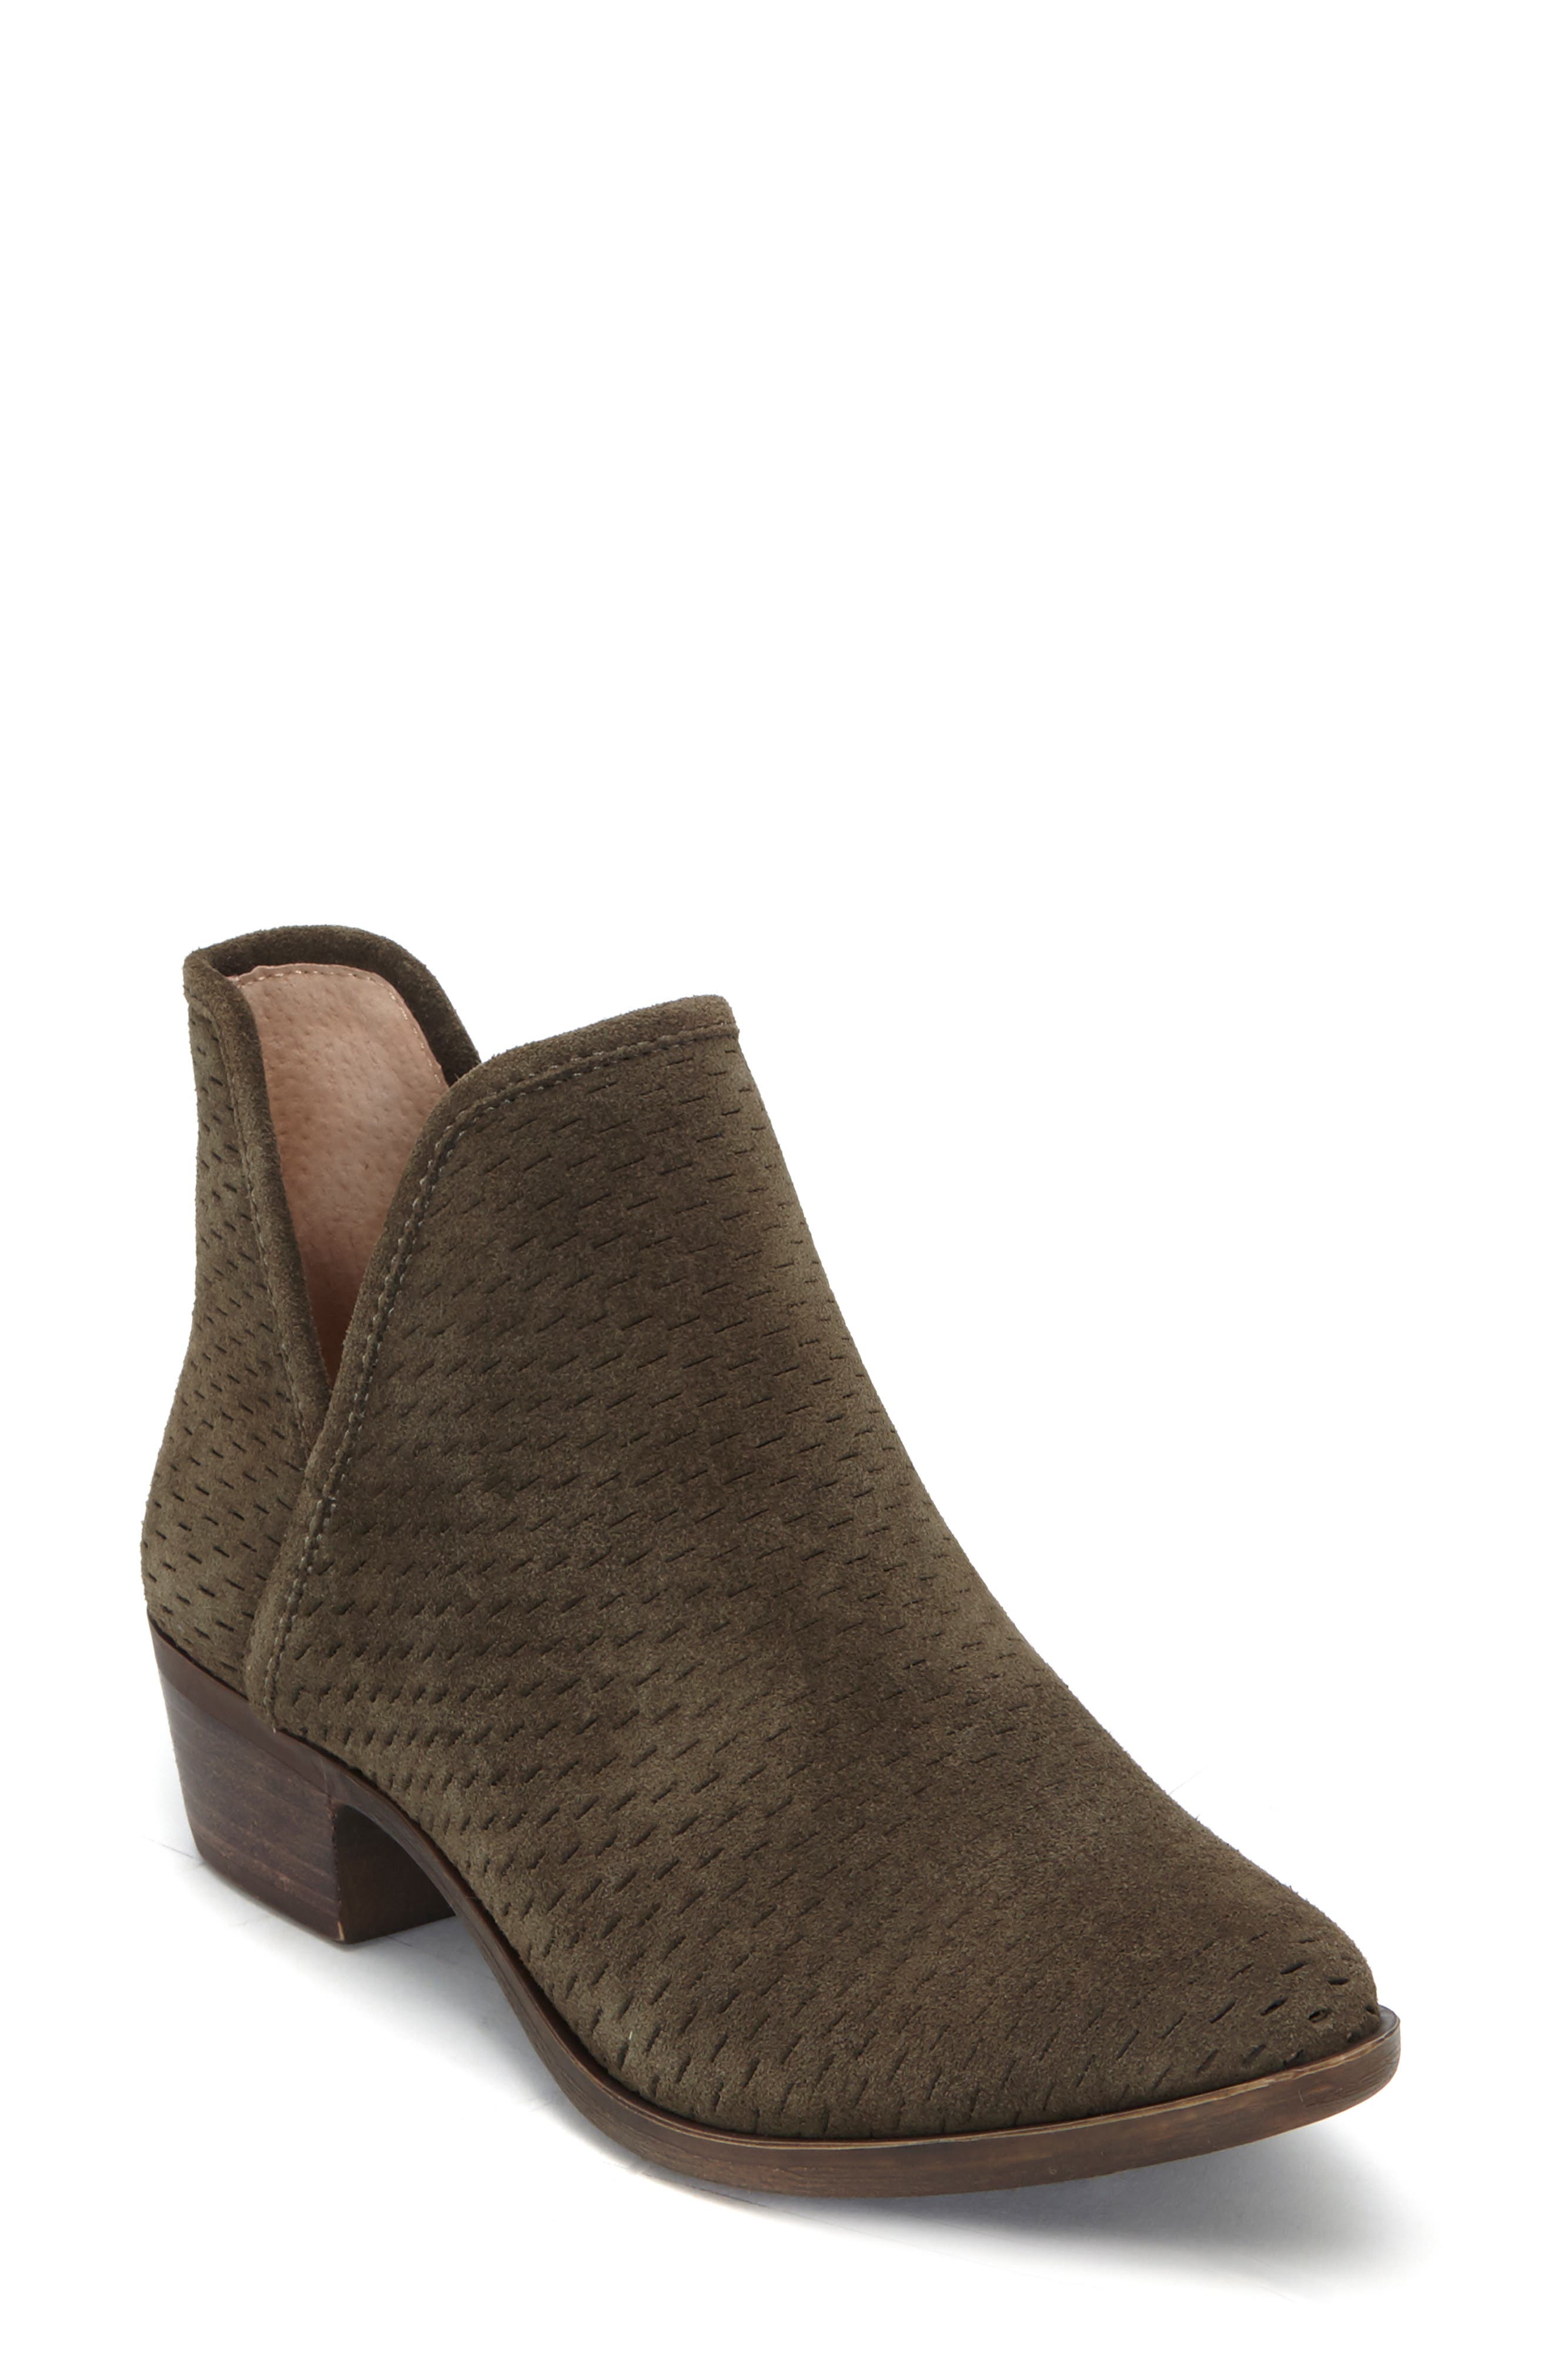 Lucky Brand Baley Perforated Suede Bootie In Dark Olive Suede